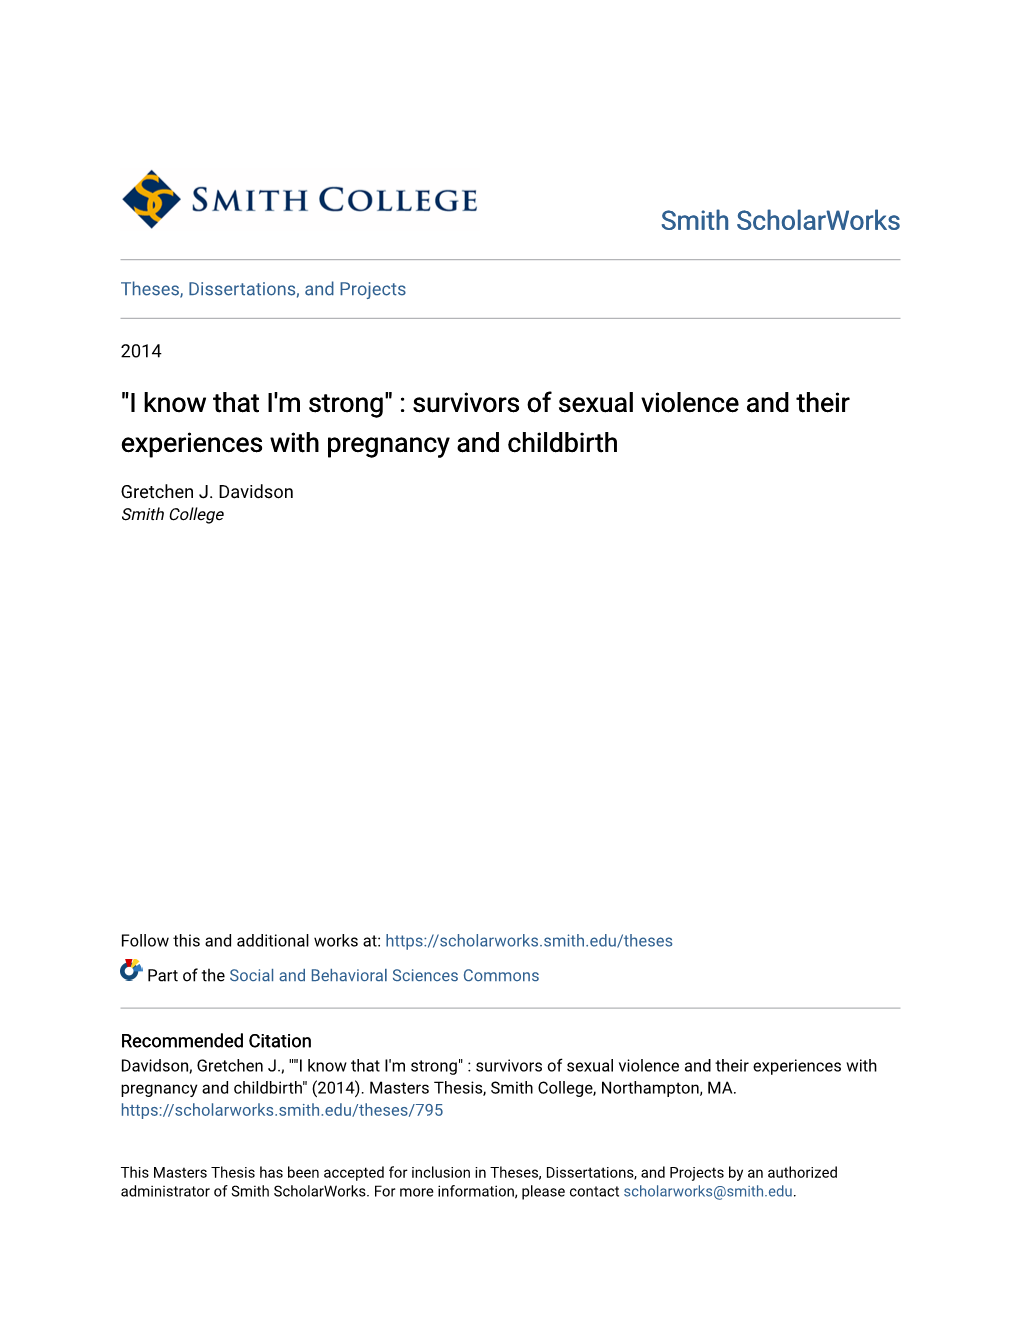 Survivors of Sexual Violence and Their Experiences with Pregnancy and Childbirth